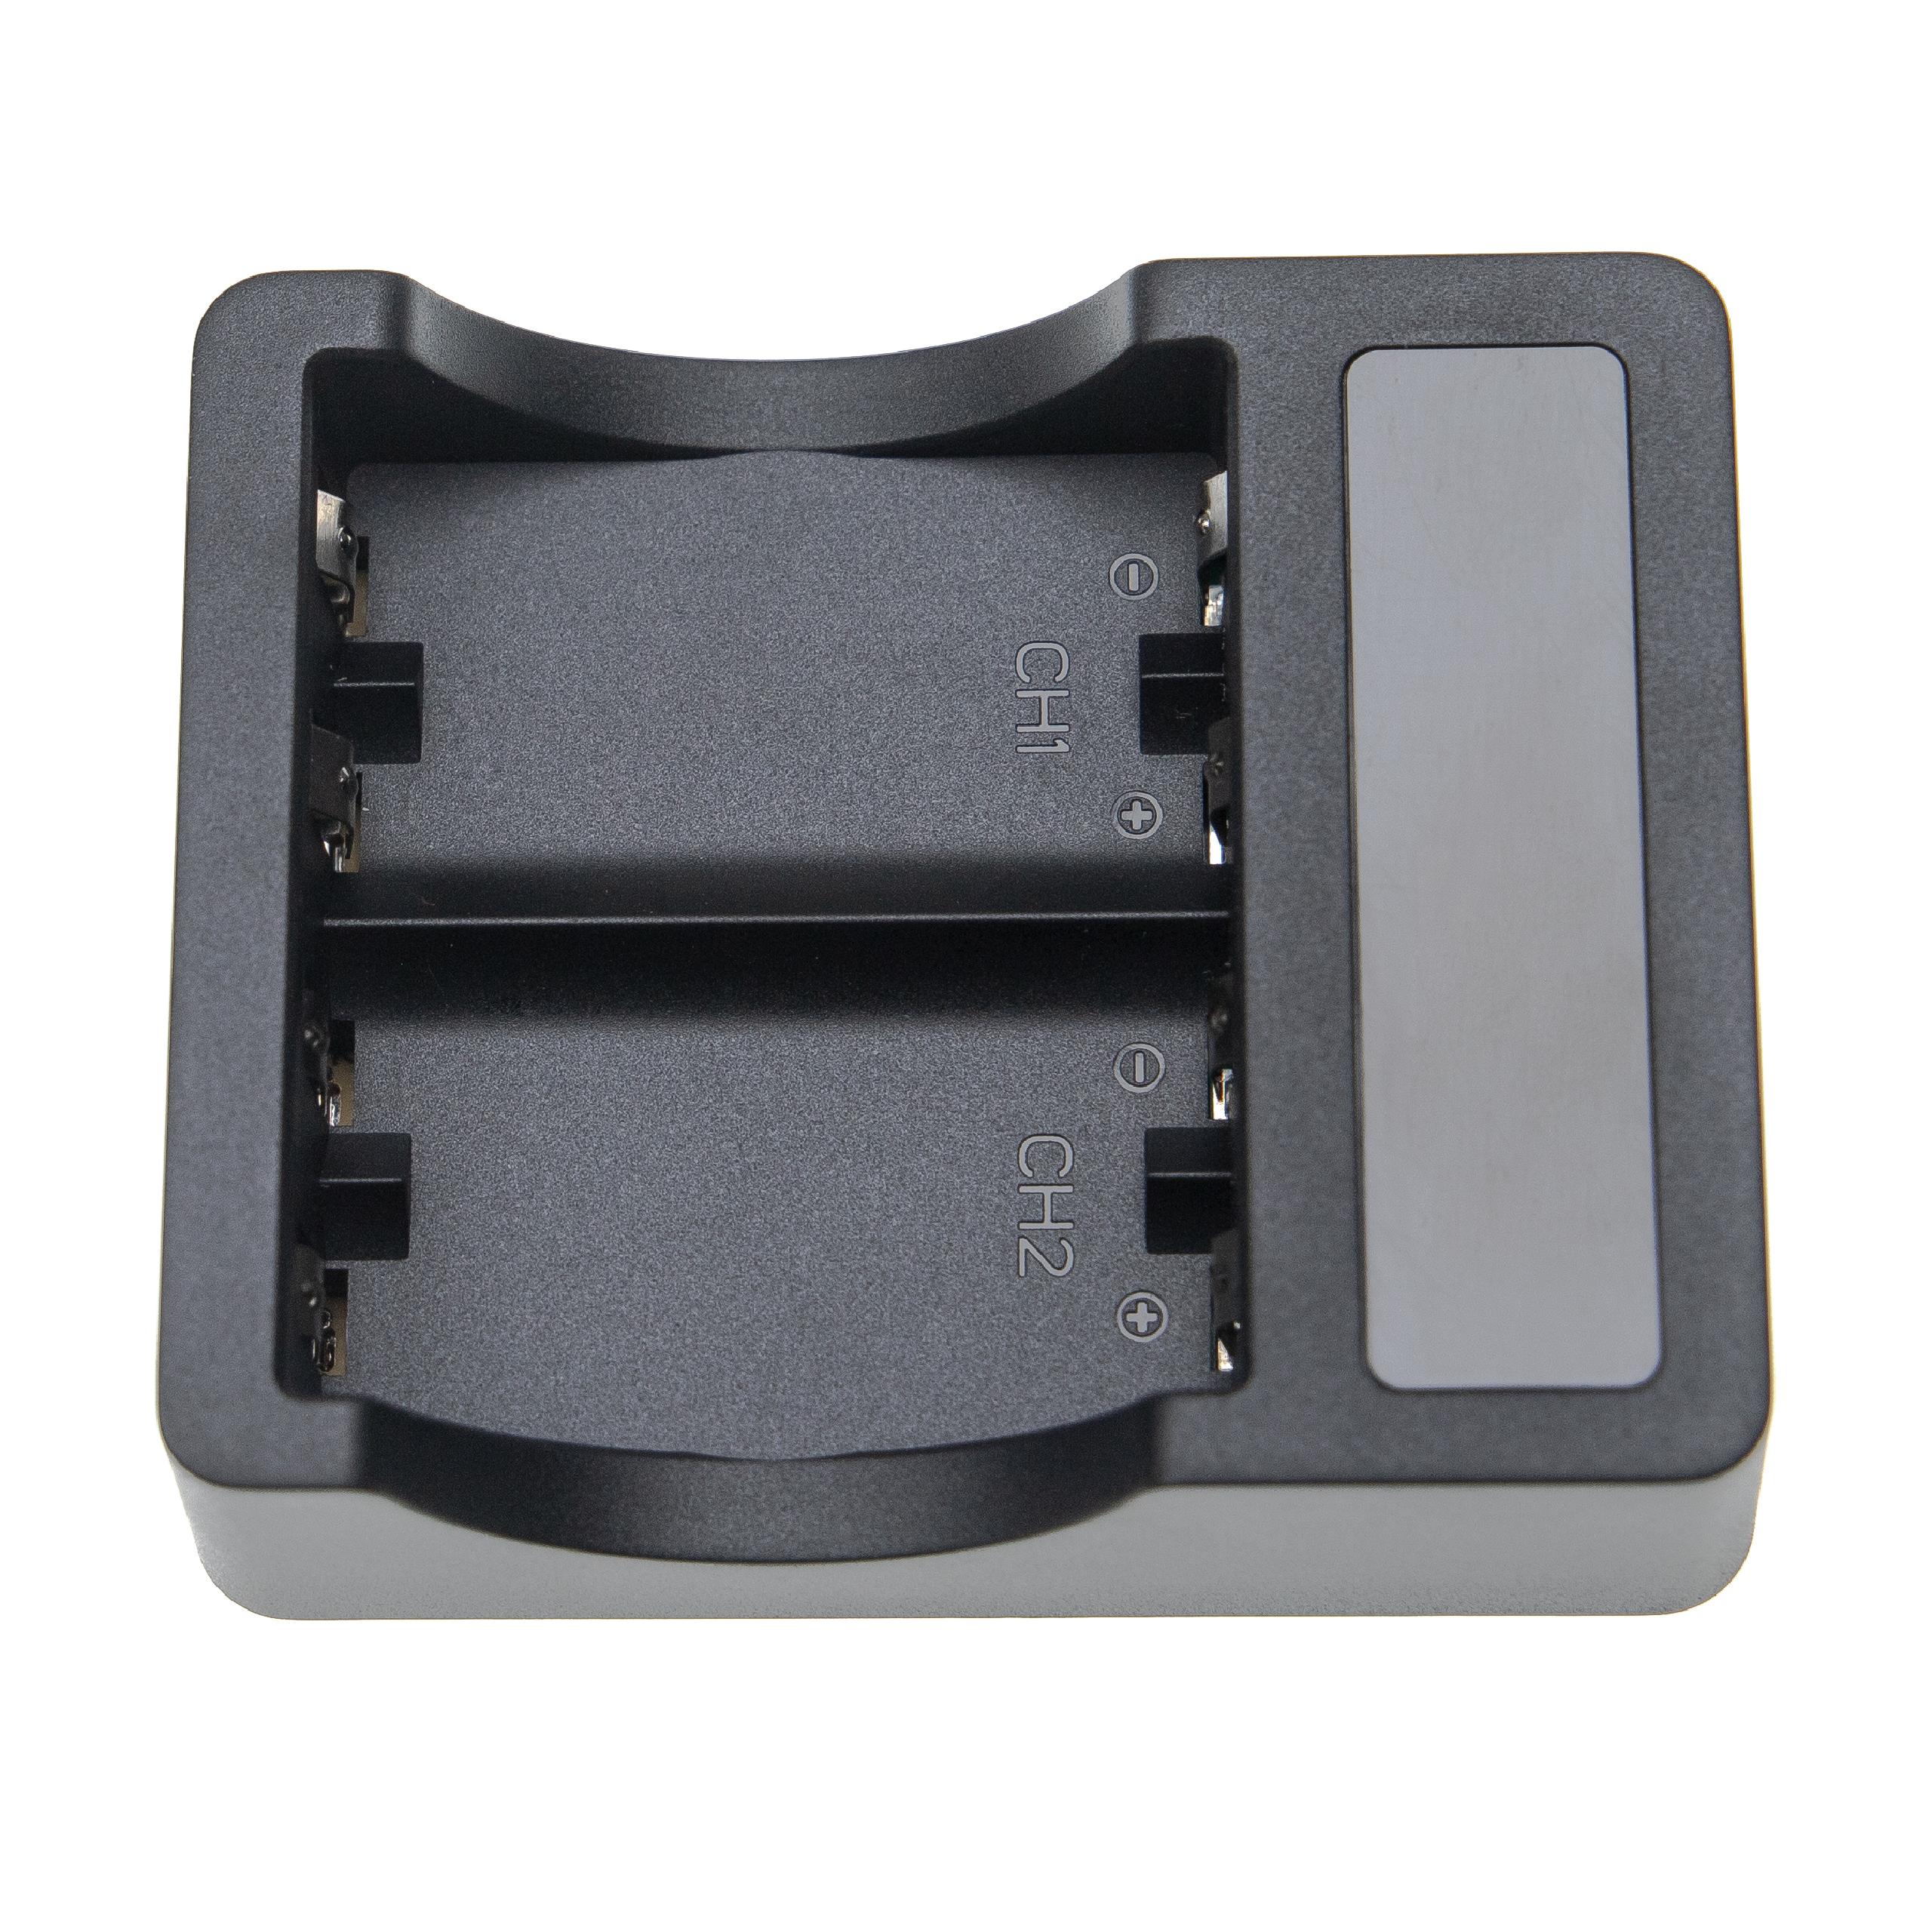 Dual Charging Station suitable for Controller Microsoft, Xbox One Controller etc. - Charging Cradle + Lead